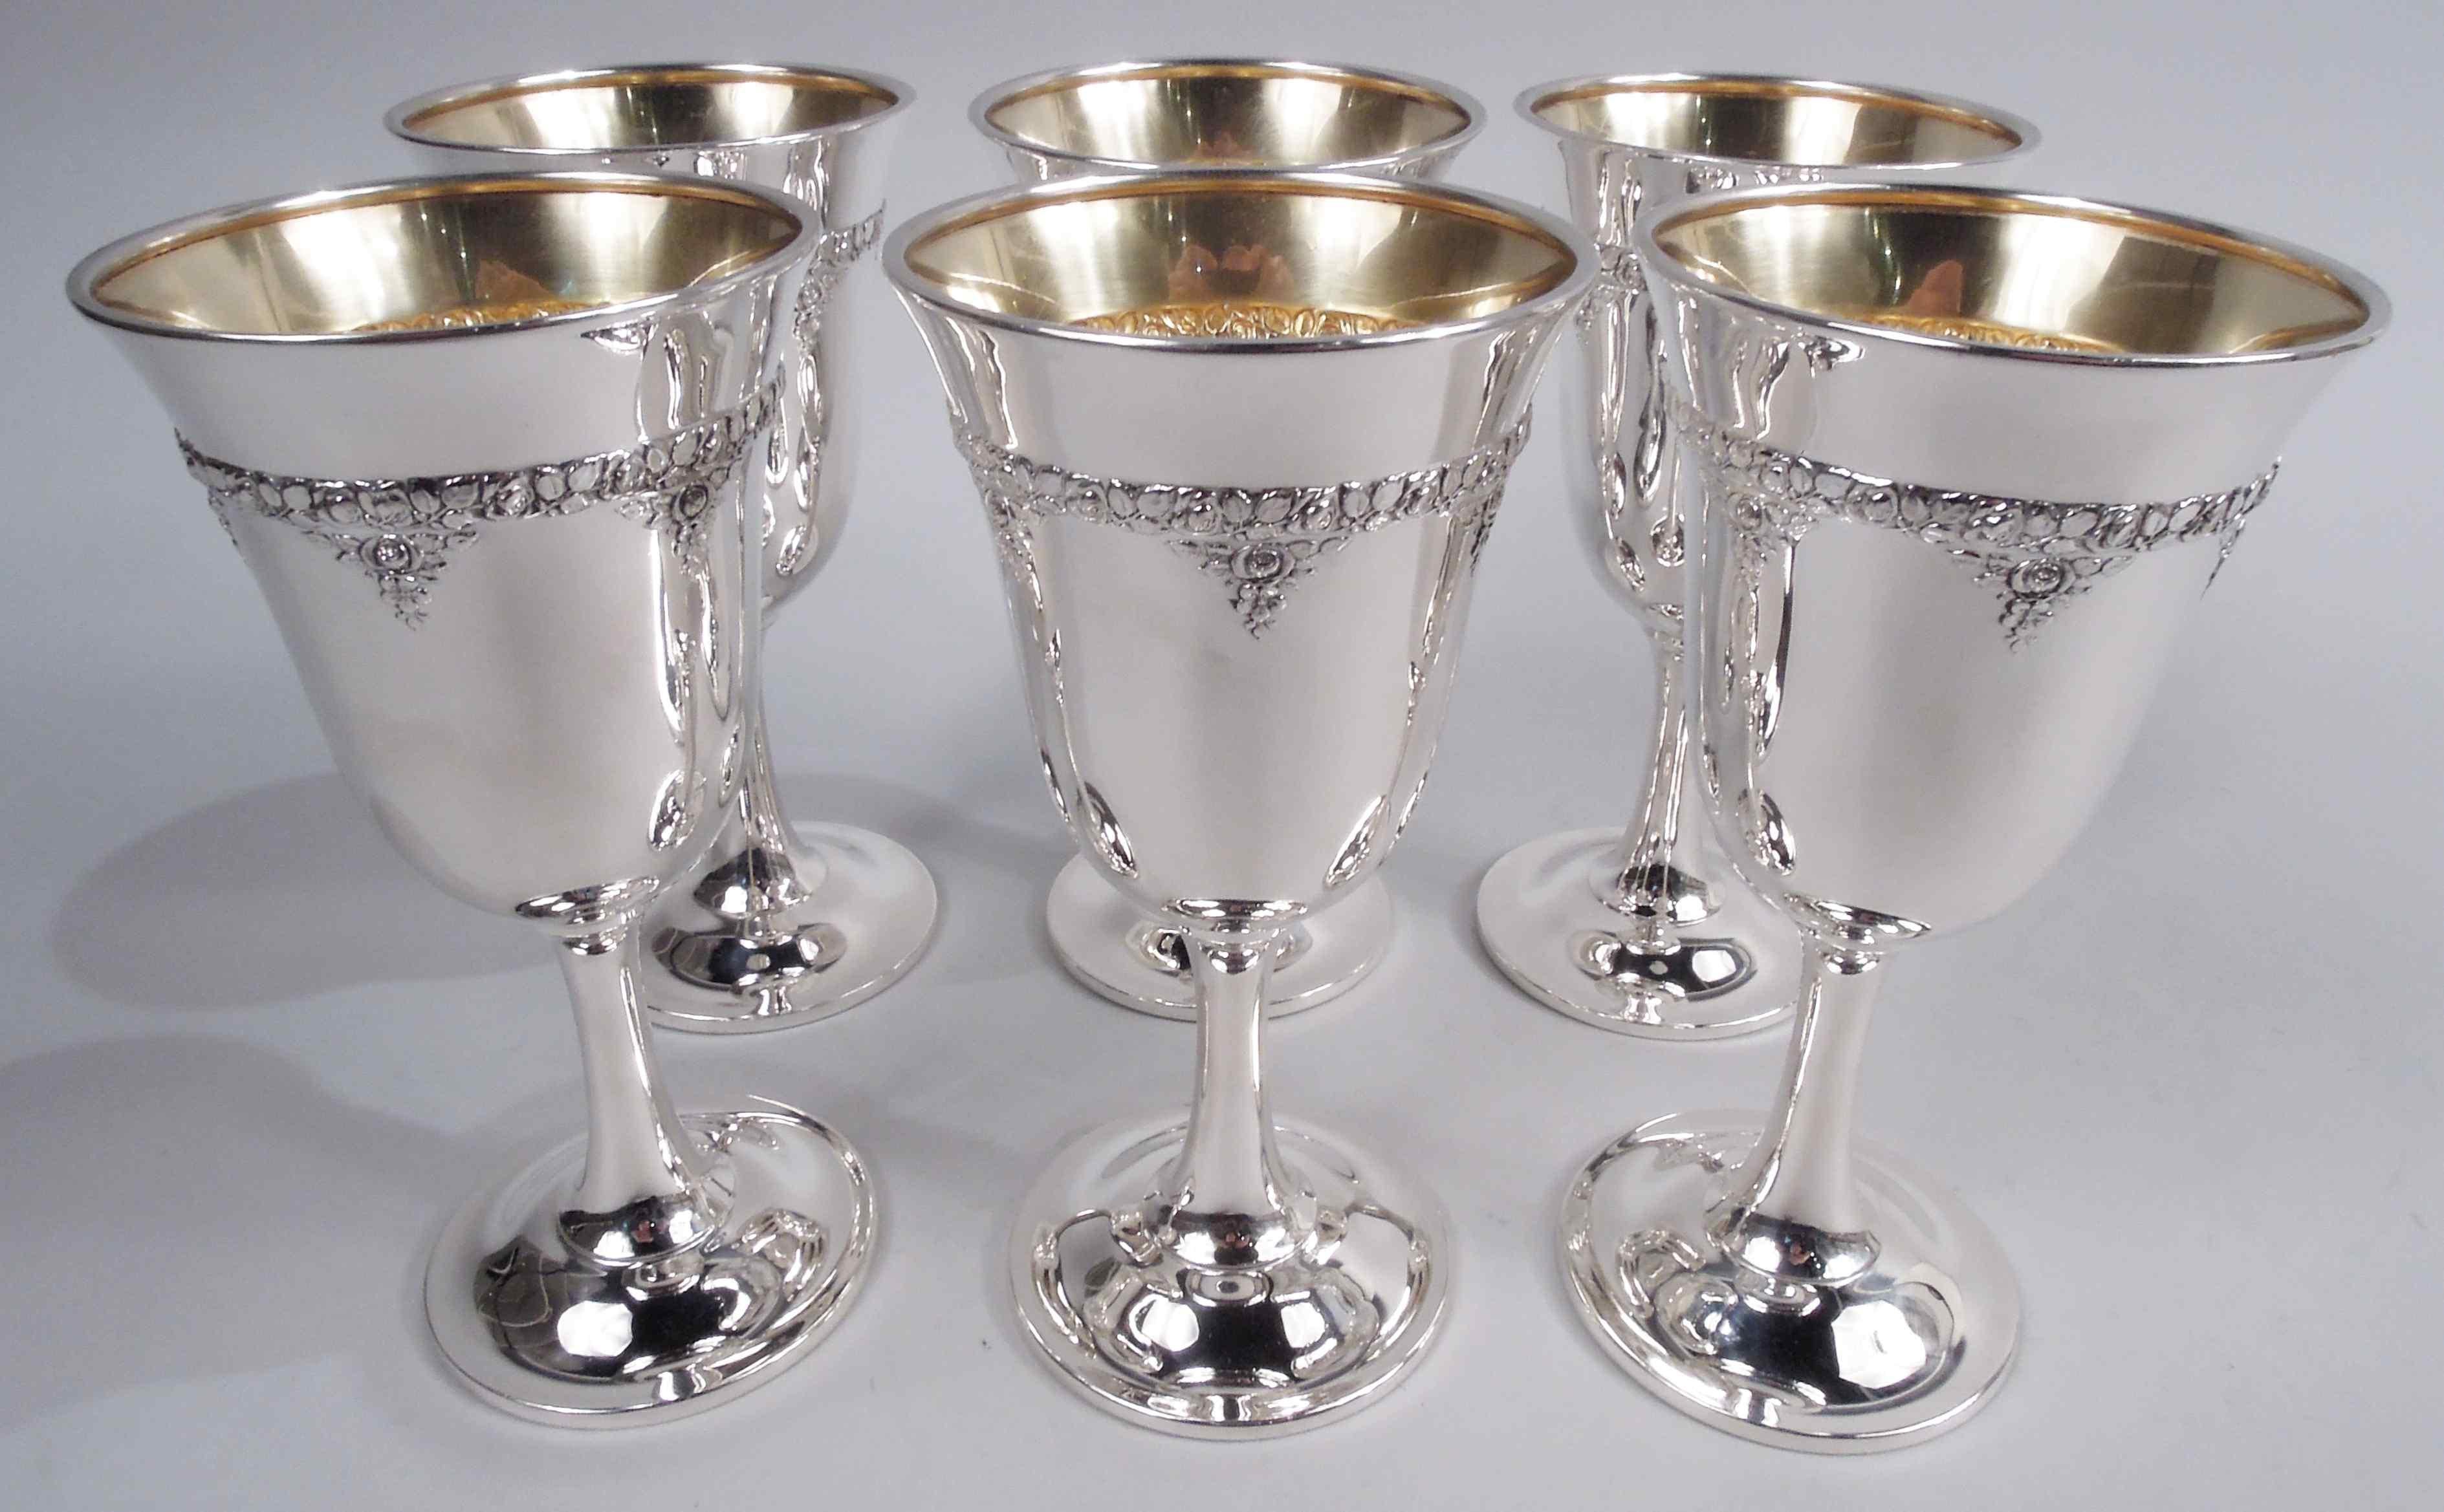 Six Normandie sterling silver goblets. Made by Wallace in Wallingford, Conn. Each: Tapering bowl with curved bottom; cylindrical stem on gently raised foot. Dense floral border with pendants. Bowl interior gilt. A nice set in a fresh and pretty